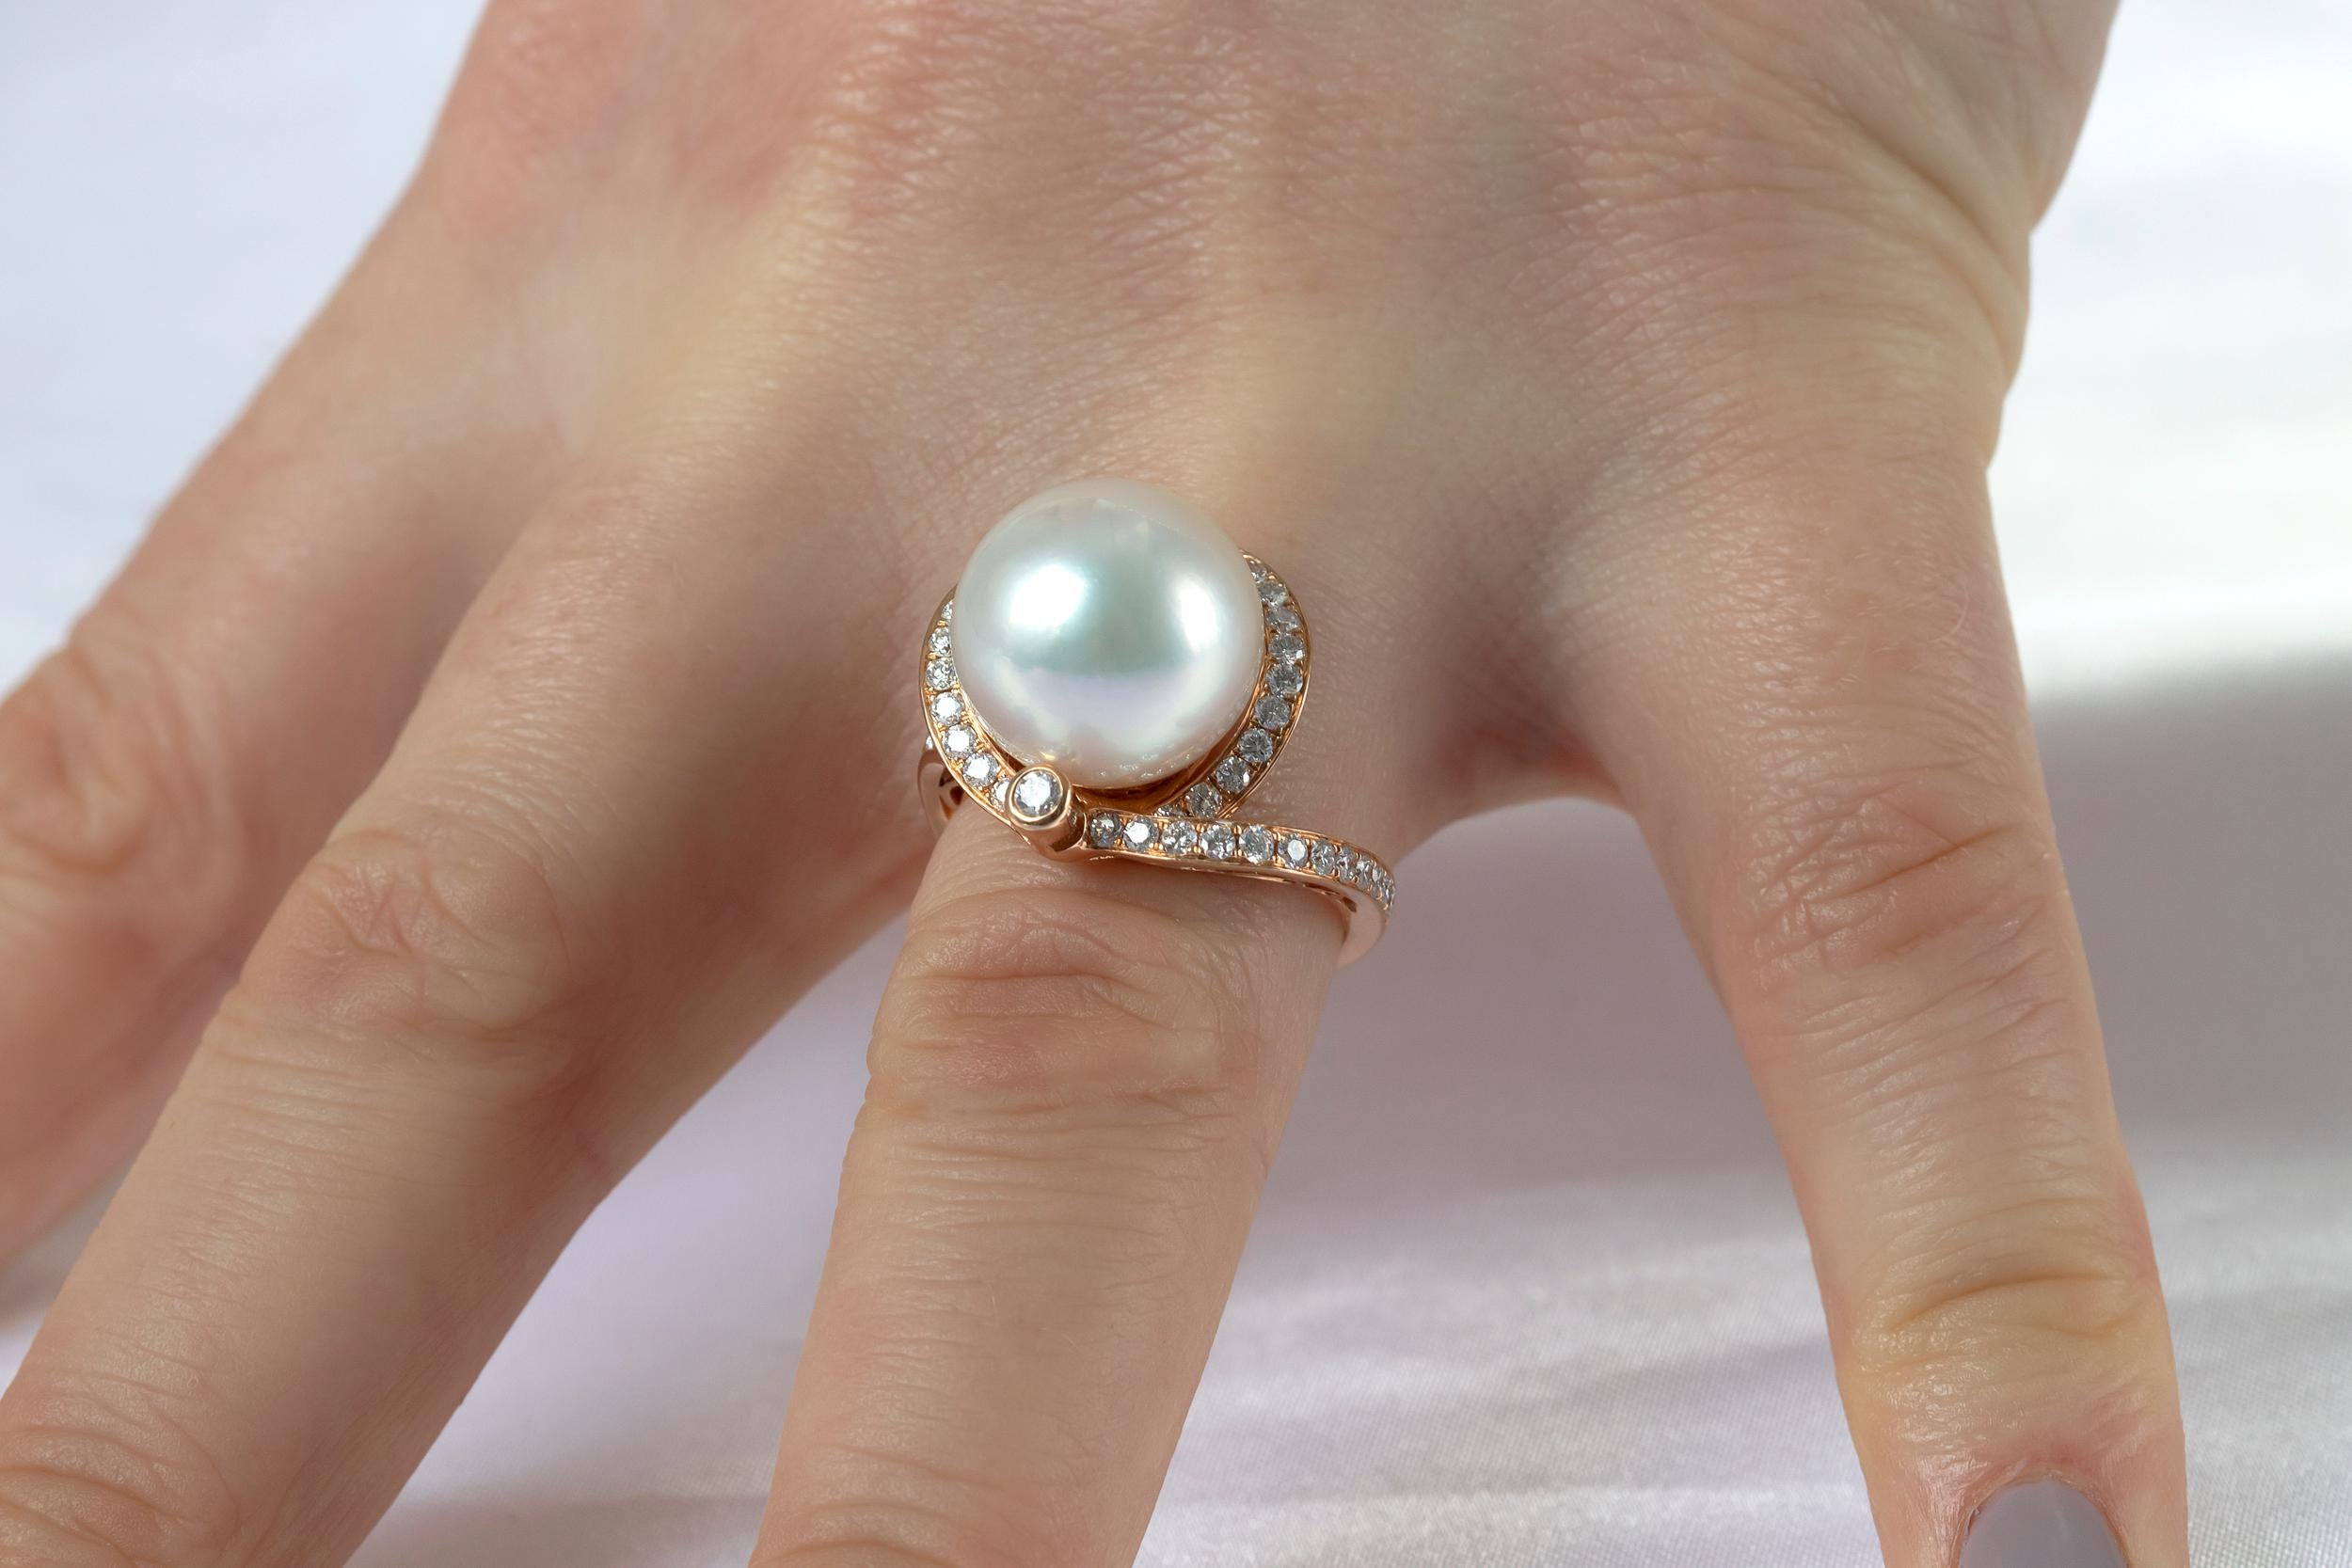 A showstopping cocktail ring by Yoko London that is sure to make a big impression. Featuring a lustrous 13.2mm South Sea Pearl at its centre and adorned with diamonds, this gorgeous ring will look amazing with any outfit it is combined with. Each